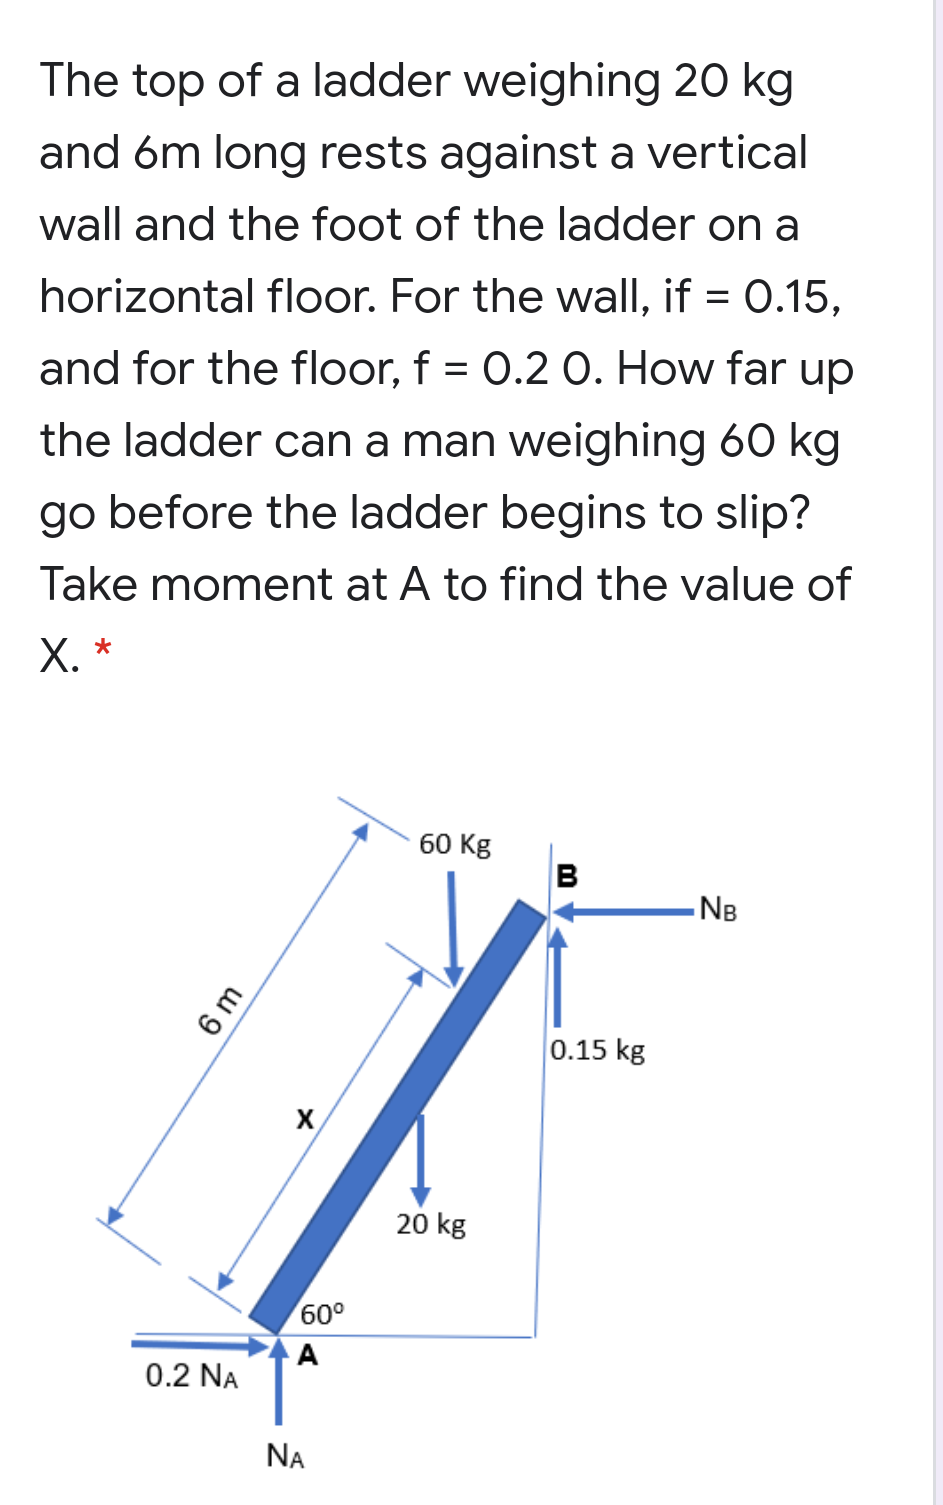 The top of a ladder weighing 20 kg
and 6m long rests against a vertical
wall and the foot of the ladder on a
horizontal floor. For the wall, if = 0.15,
and for the floor, f = 0.2 0. How far up
the ladder can a man weighing 60 kg
go before the ladder begins to slip?
Take moment at A to find the value of
Х. *
60 Kg
- NB
0.15 kg
20 kg
60°
A
0.2 NA
NA
